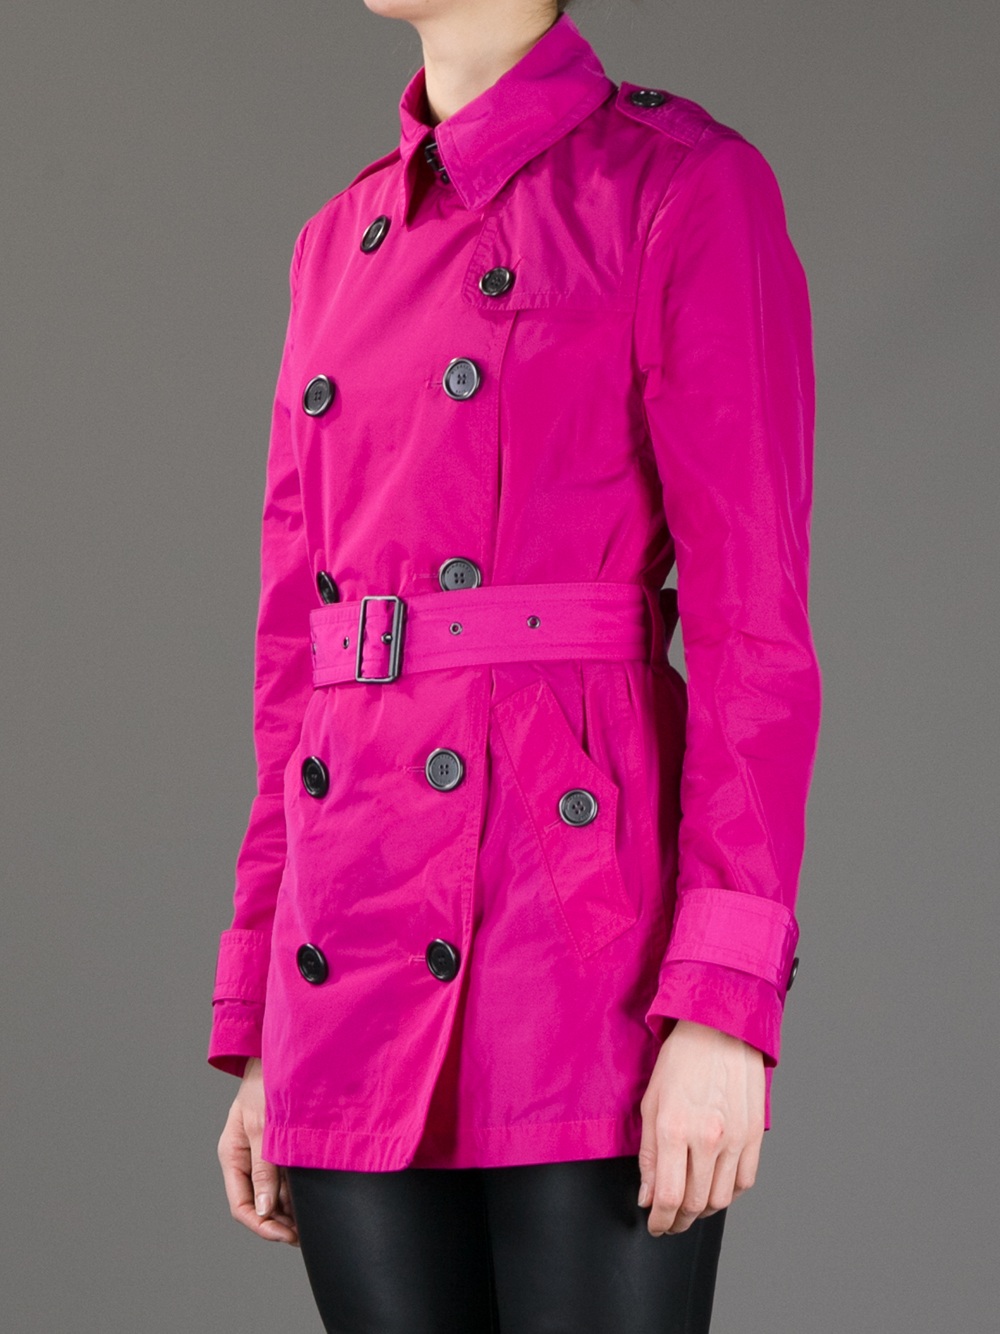 Burberry brit Light Weight Trench Coat in Pink | Lyst